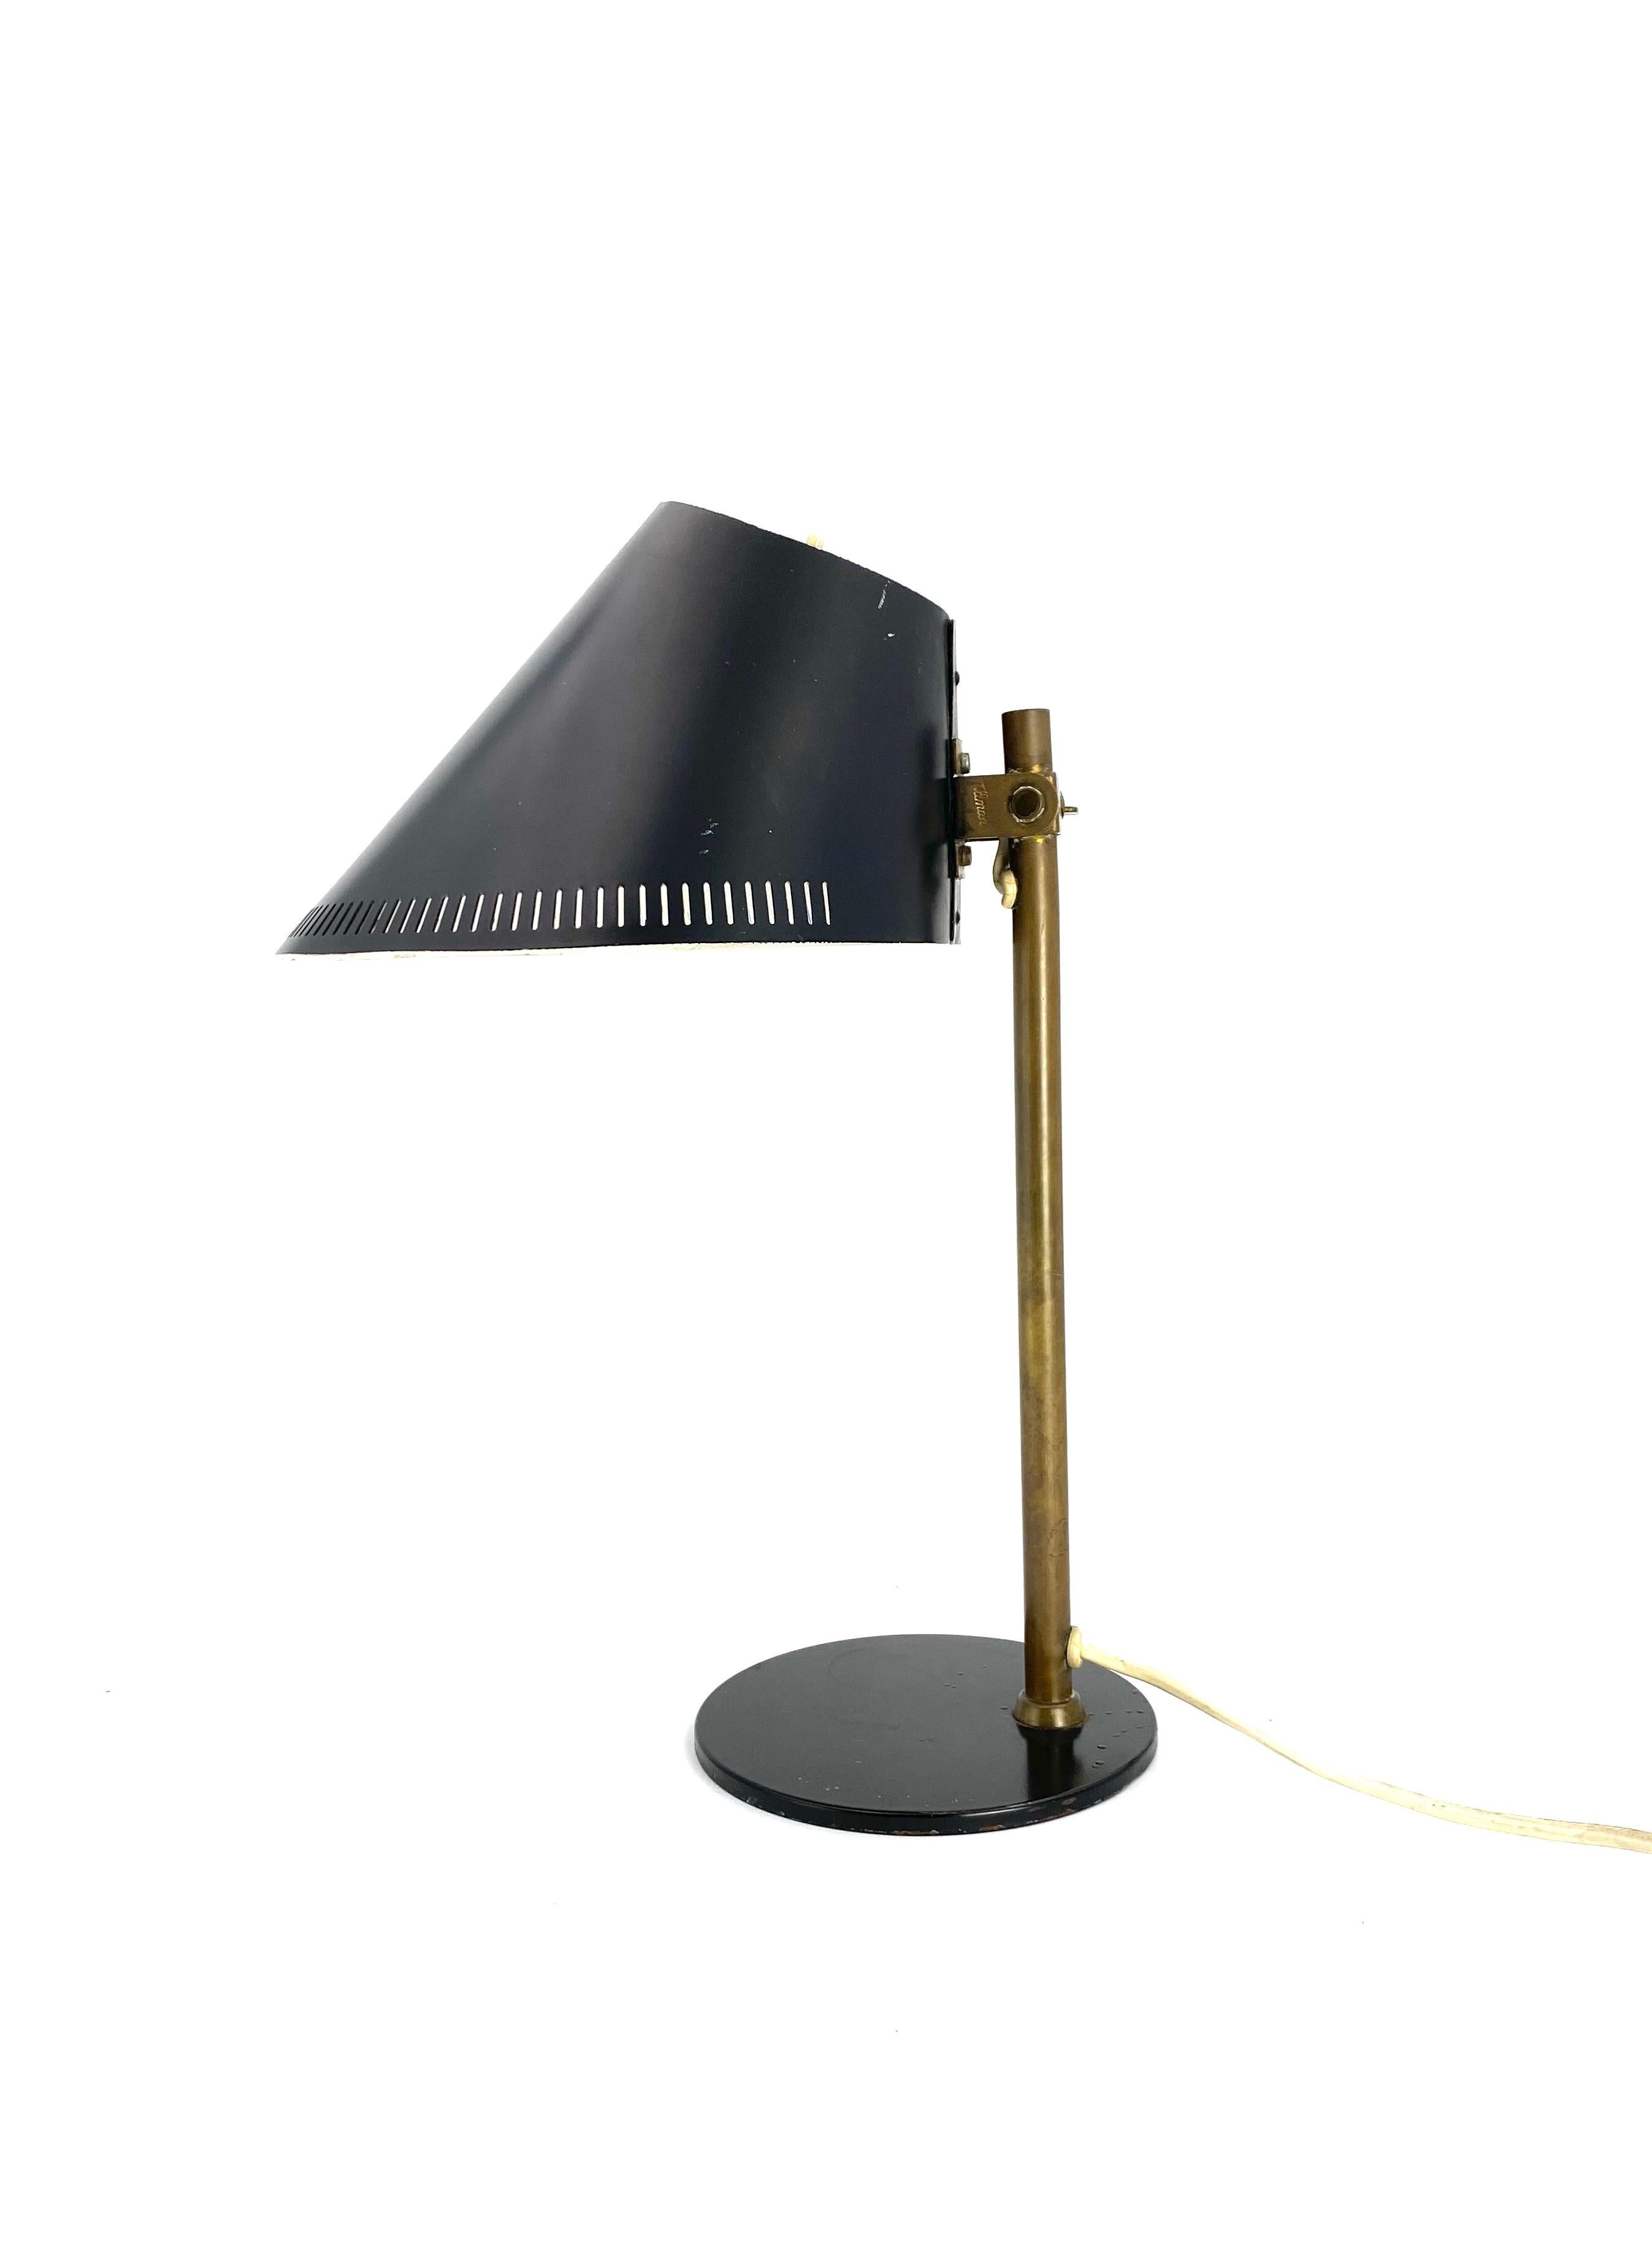 Paavo Tynell Rare Table Lamp Mod. 9227, by Taito E Idman, Finland, 1958 For Sale 5